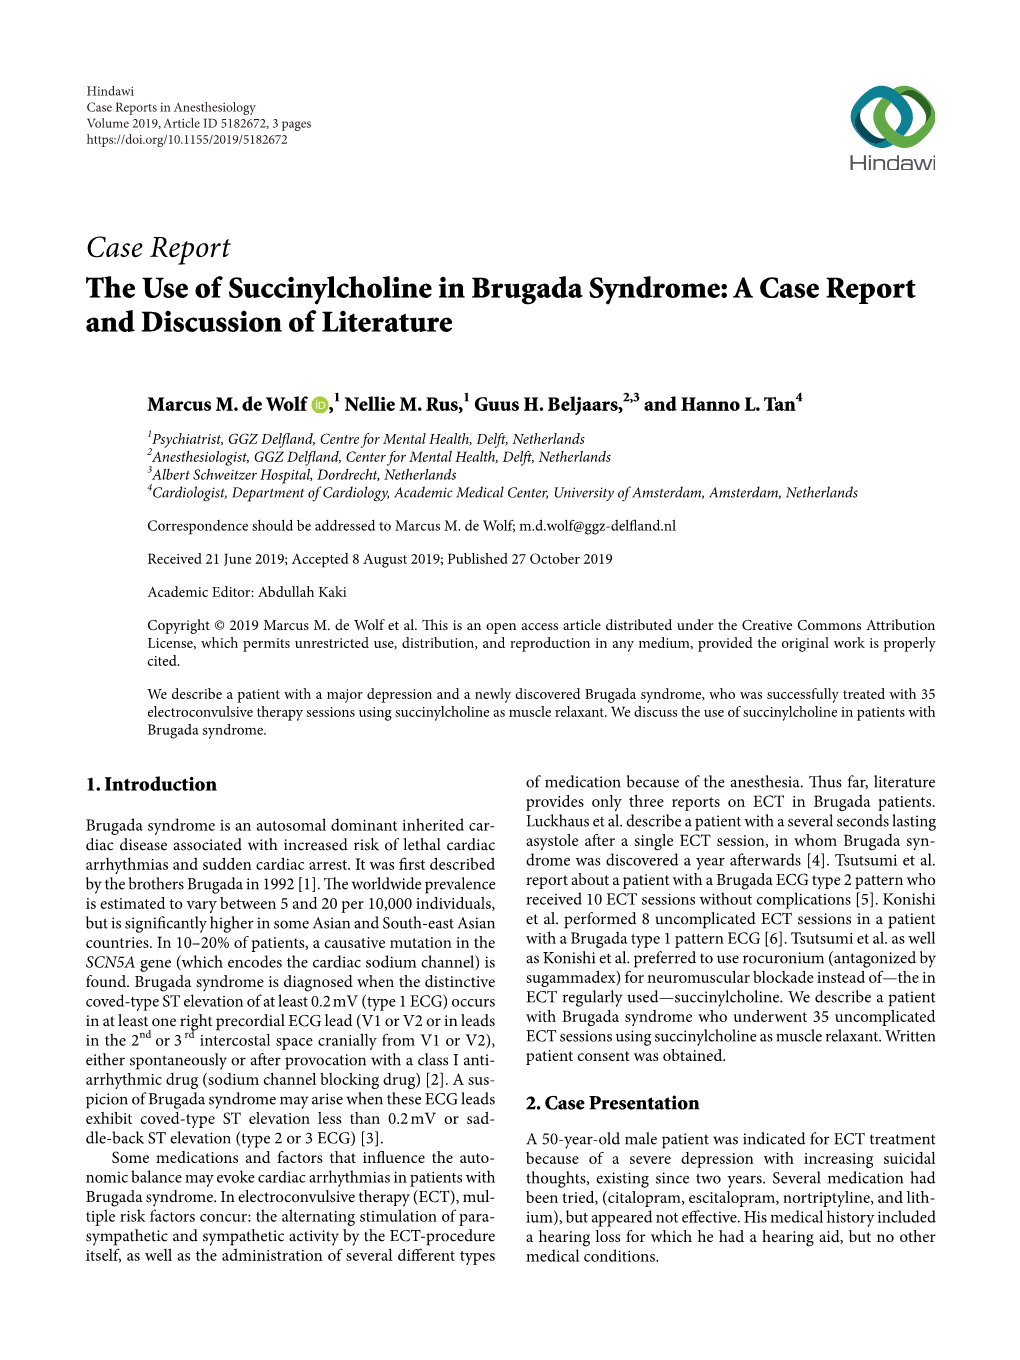 Case Report the Use of Succinylcholine in Brugada Syndrome: a Case Report and Discussion of Literature